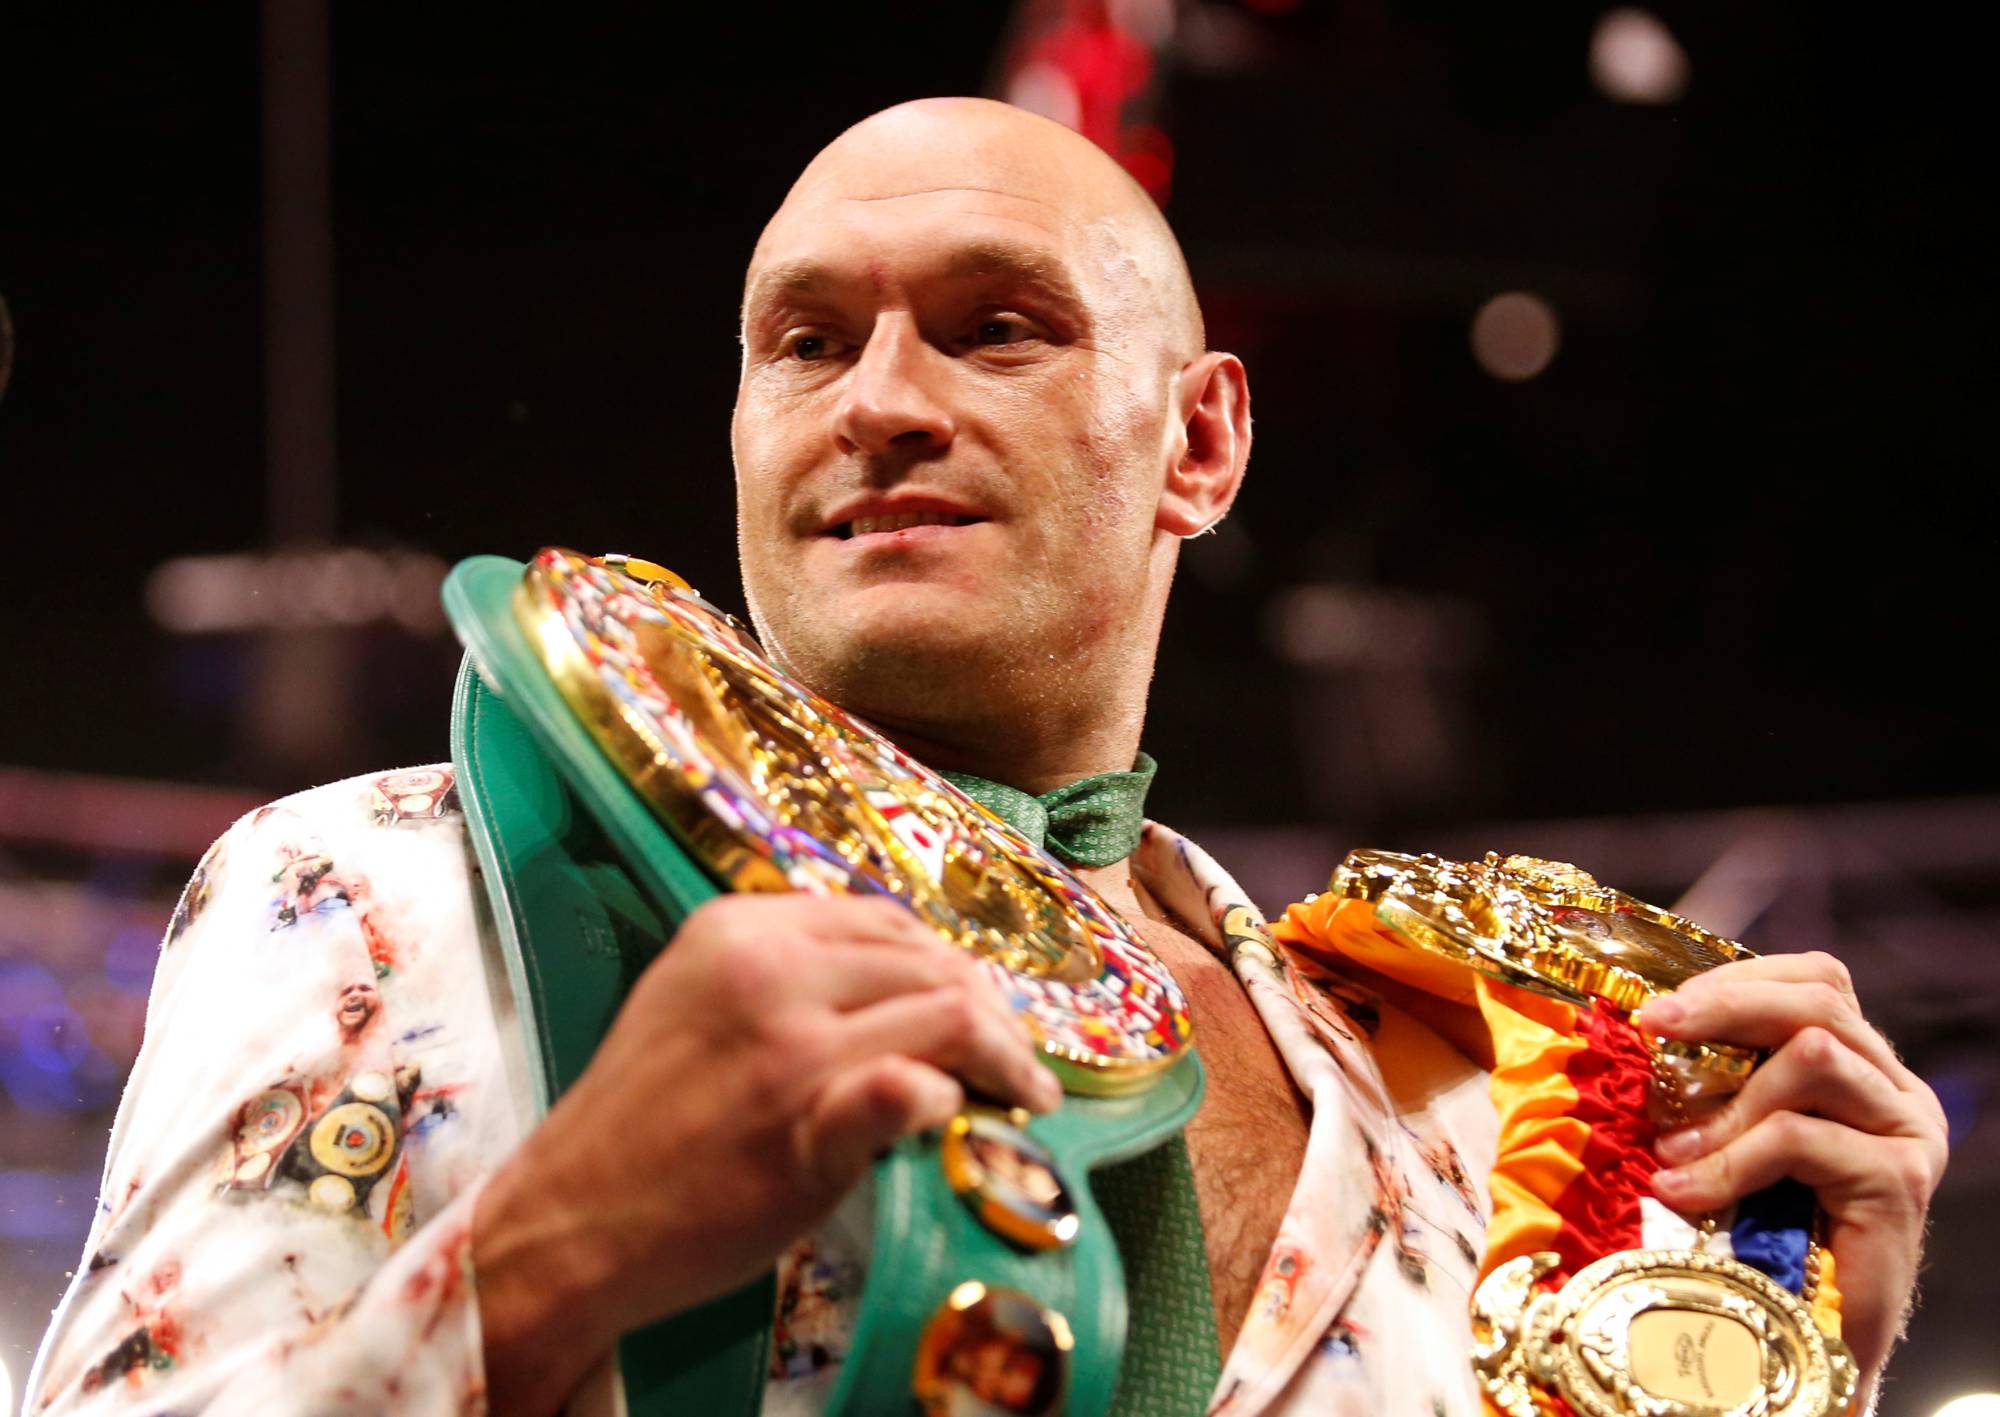 Tyson Fury says hell be sad and lonely when career ends